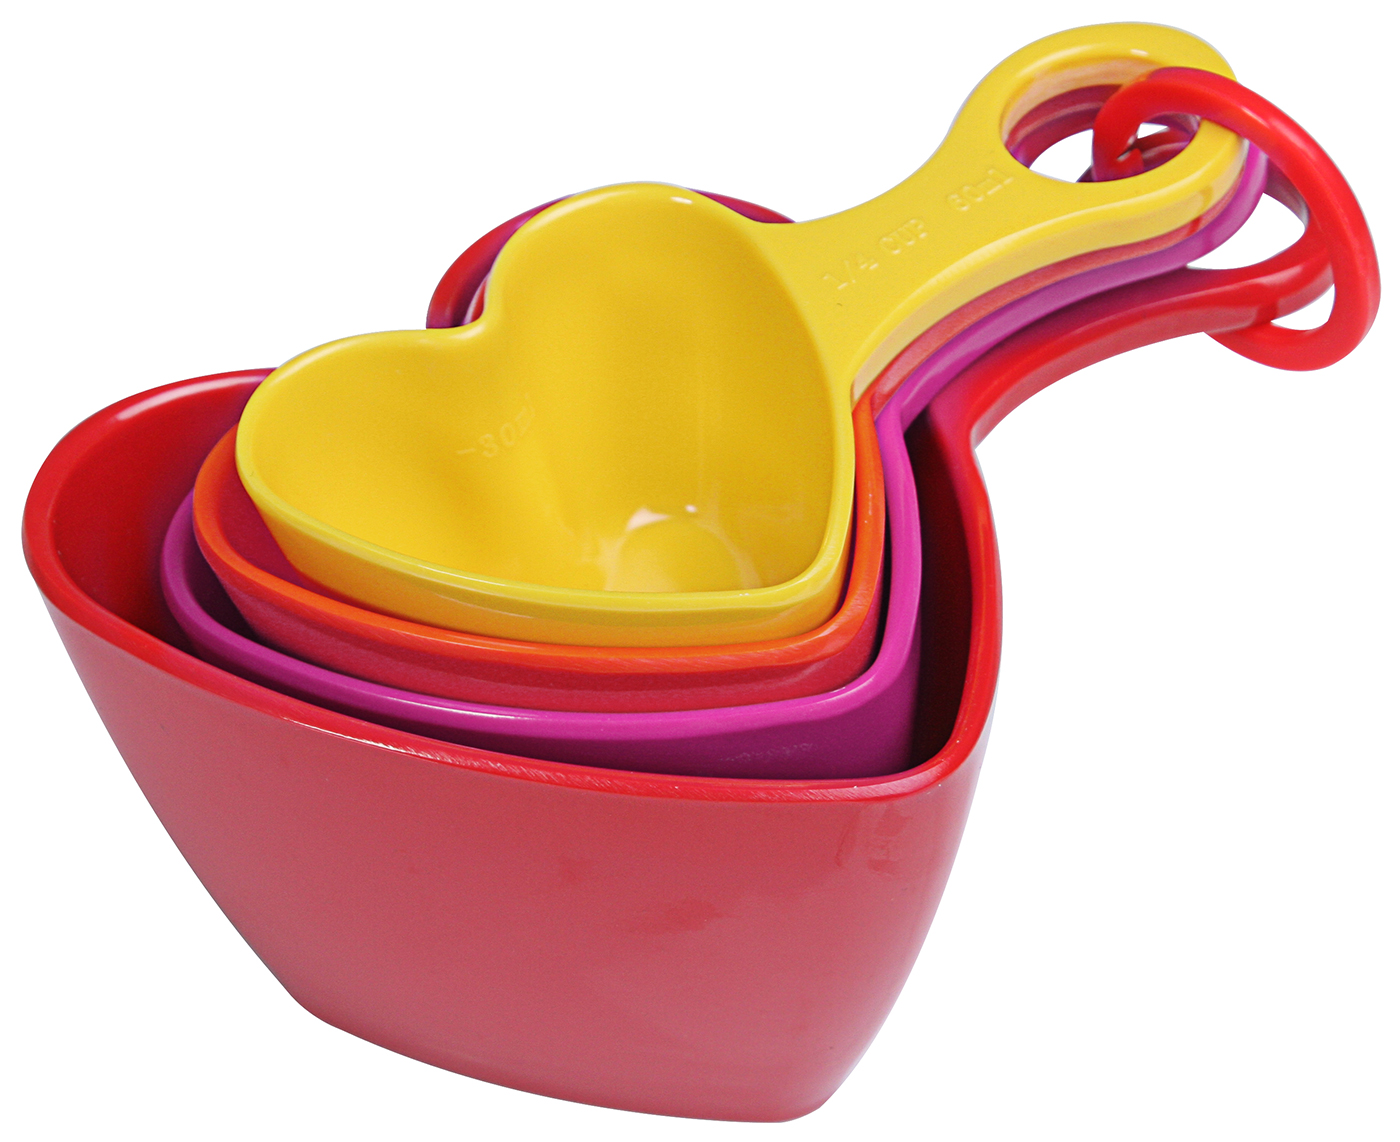 measuring cup clip art free - photo #46